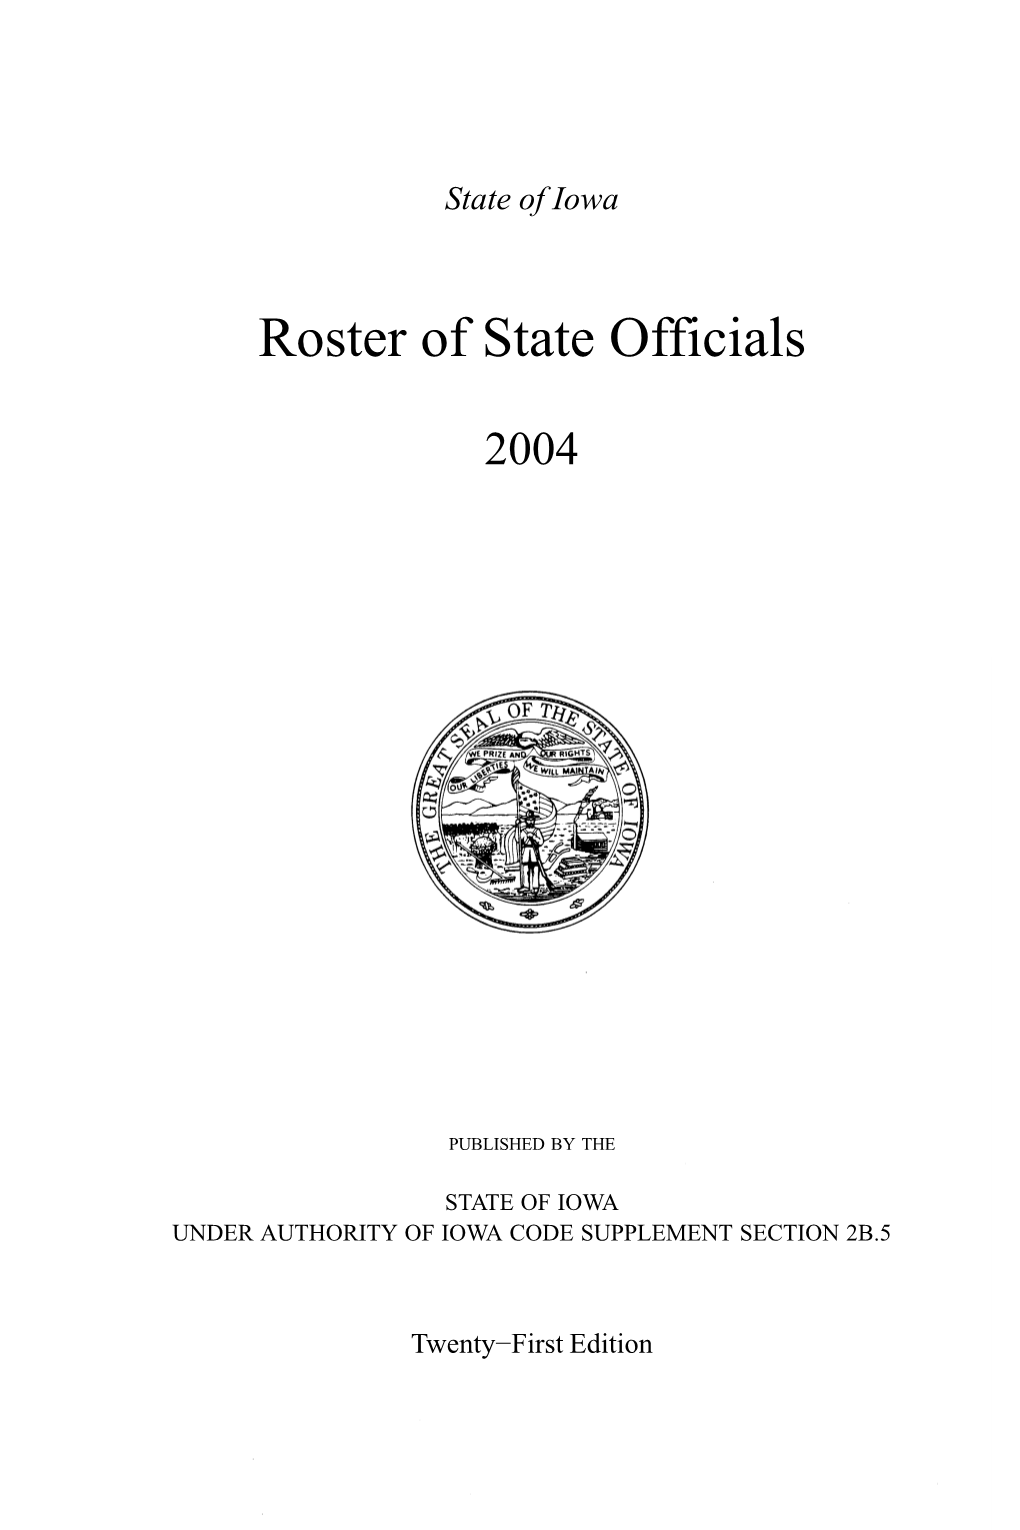 Roster of State Officials